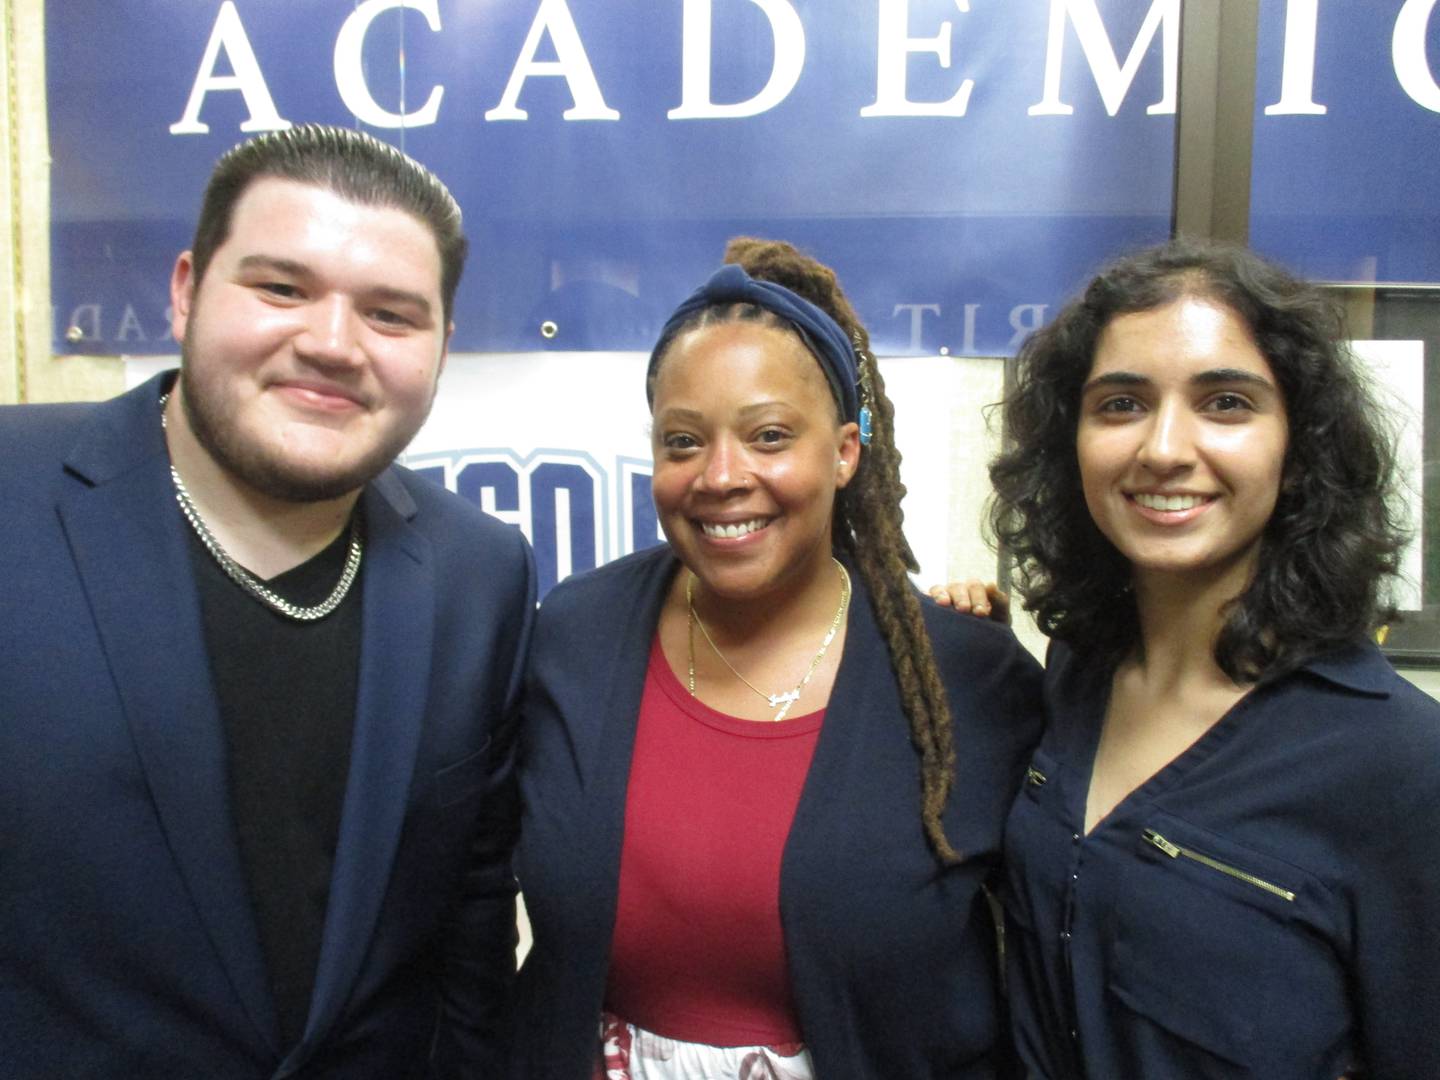 Oswego School District 308 Director of Diversity, Equity and Inclusion Jadon Waller, center, is shown here with high school student ambassadors Colton Sannito, left, and Aanya Roy. (Mark Foster -- mfoster@shawmedia.com)